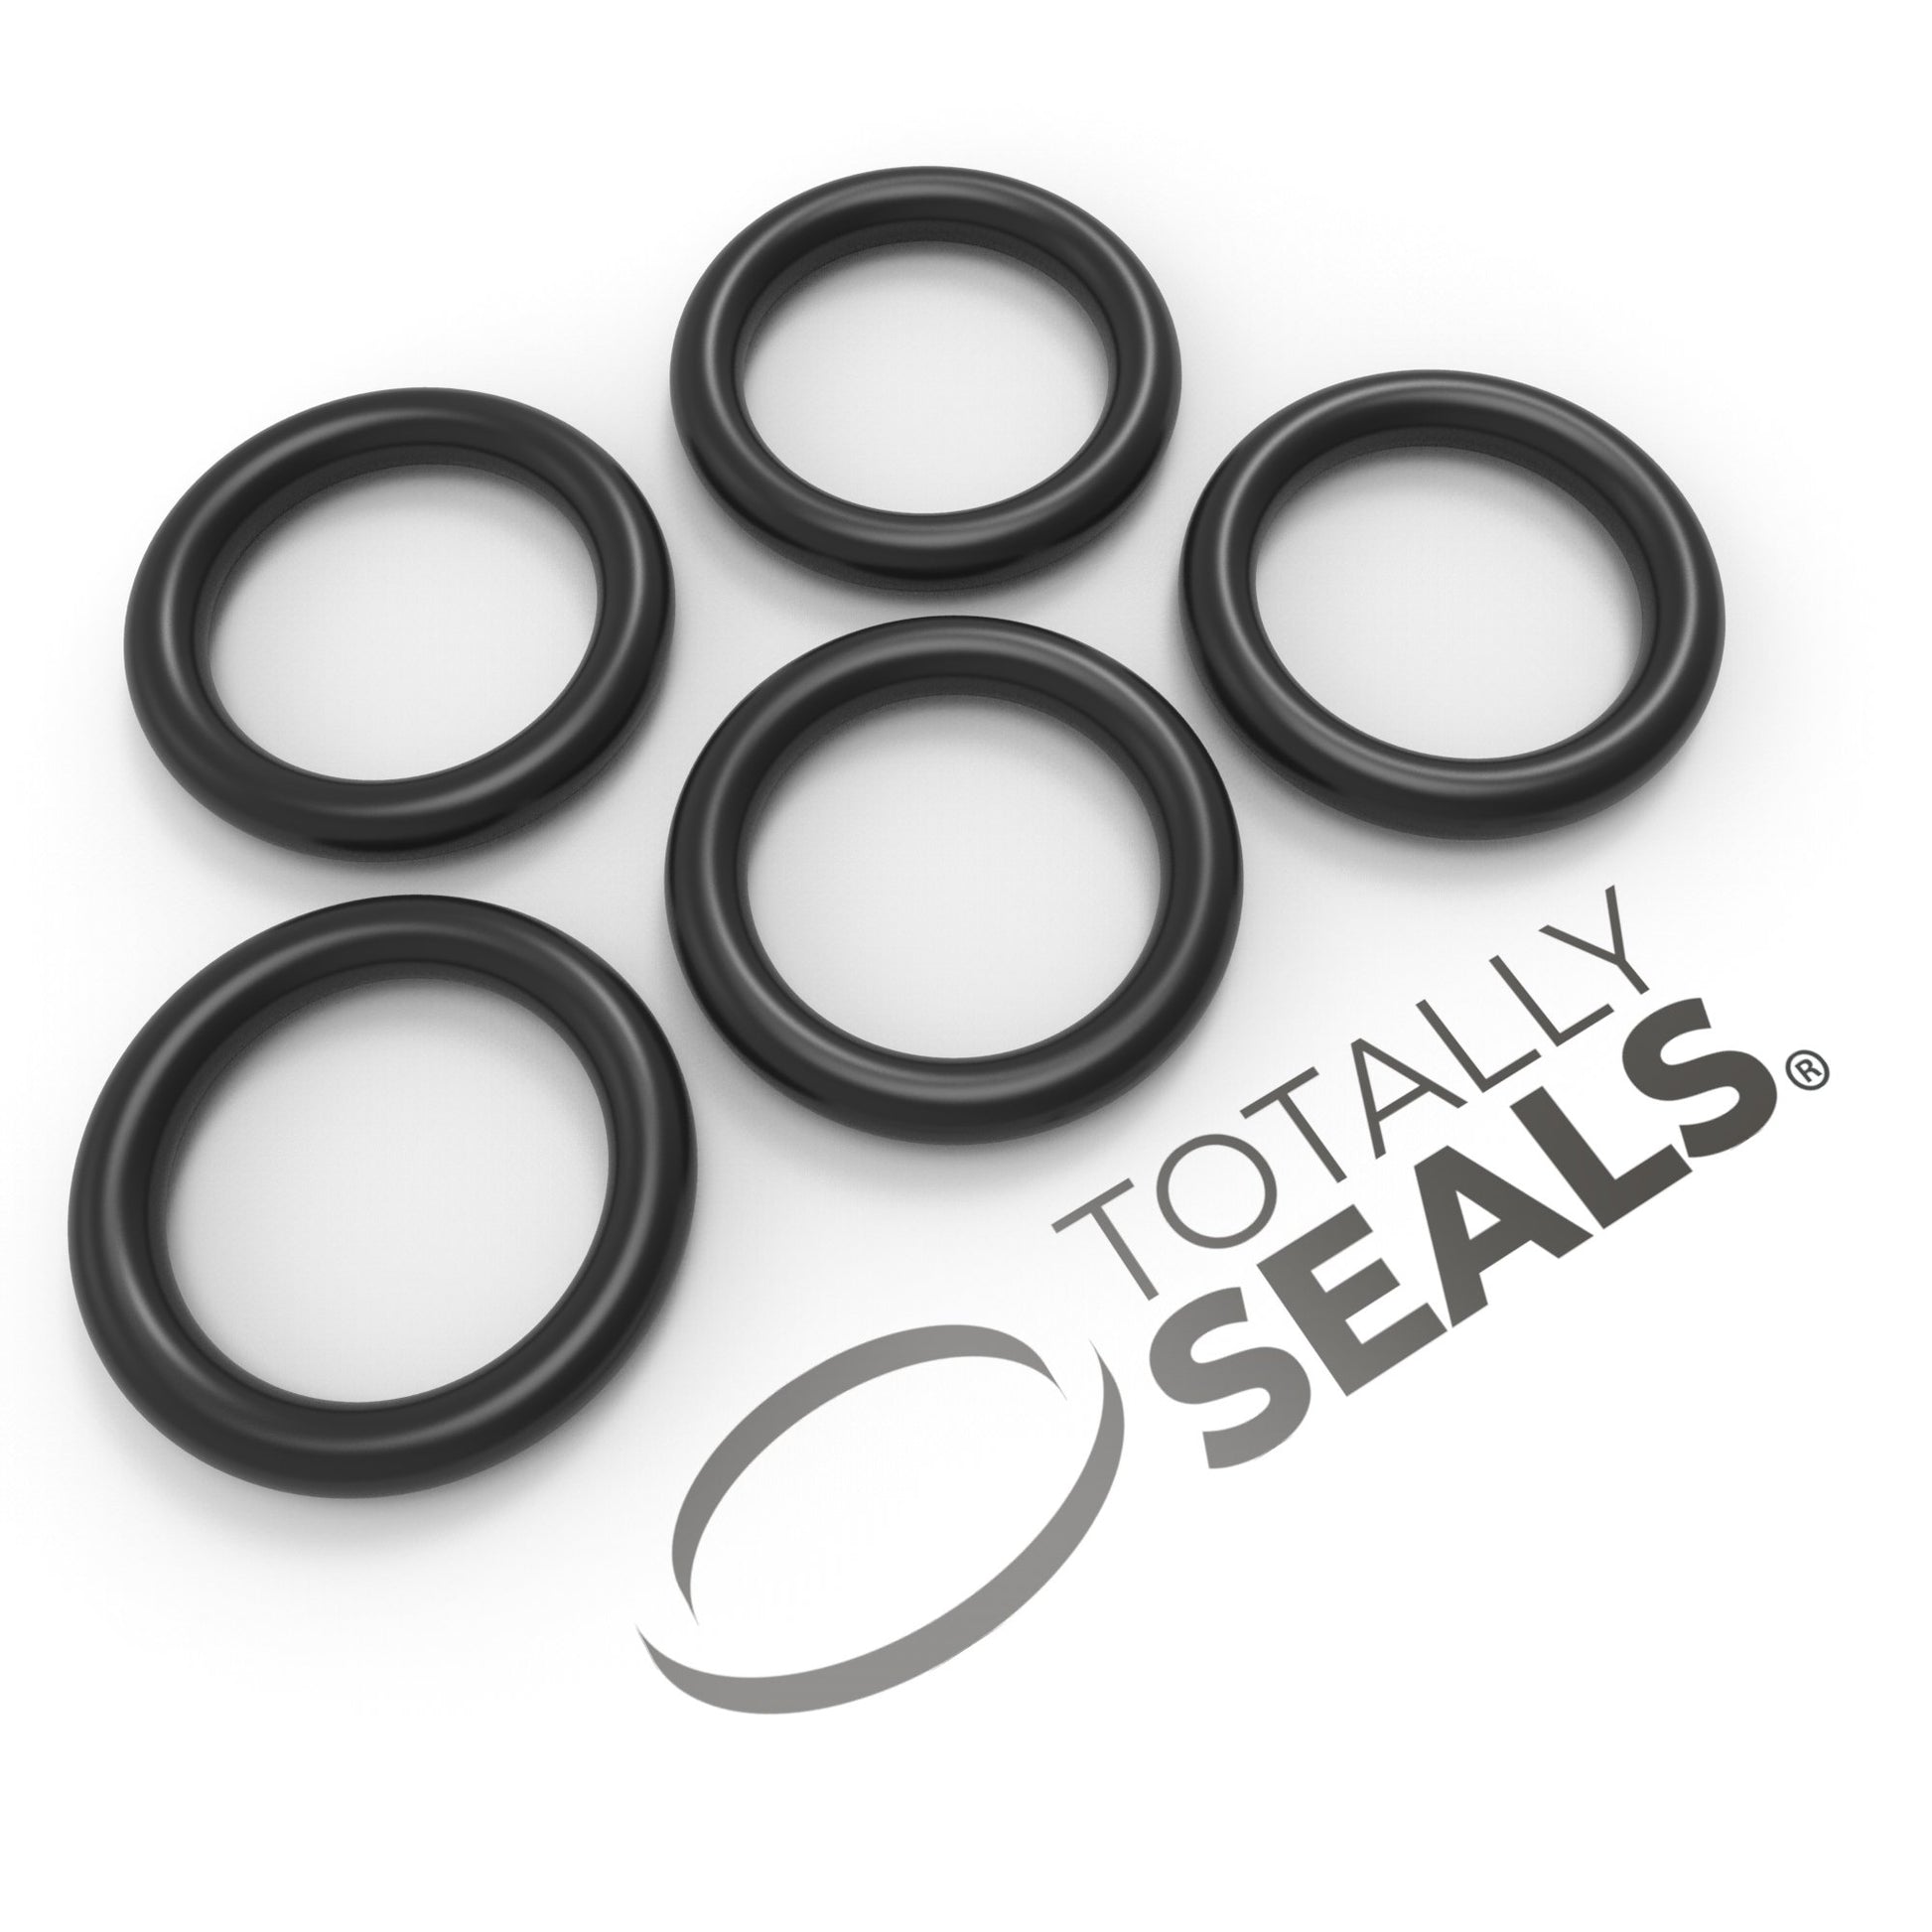 1-7/16" x 1/8" (BS221) Imperial Nitrile O-Rings - Totally Seals®